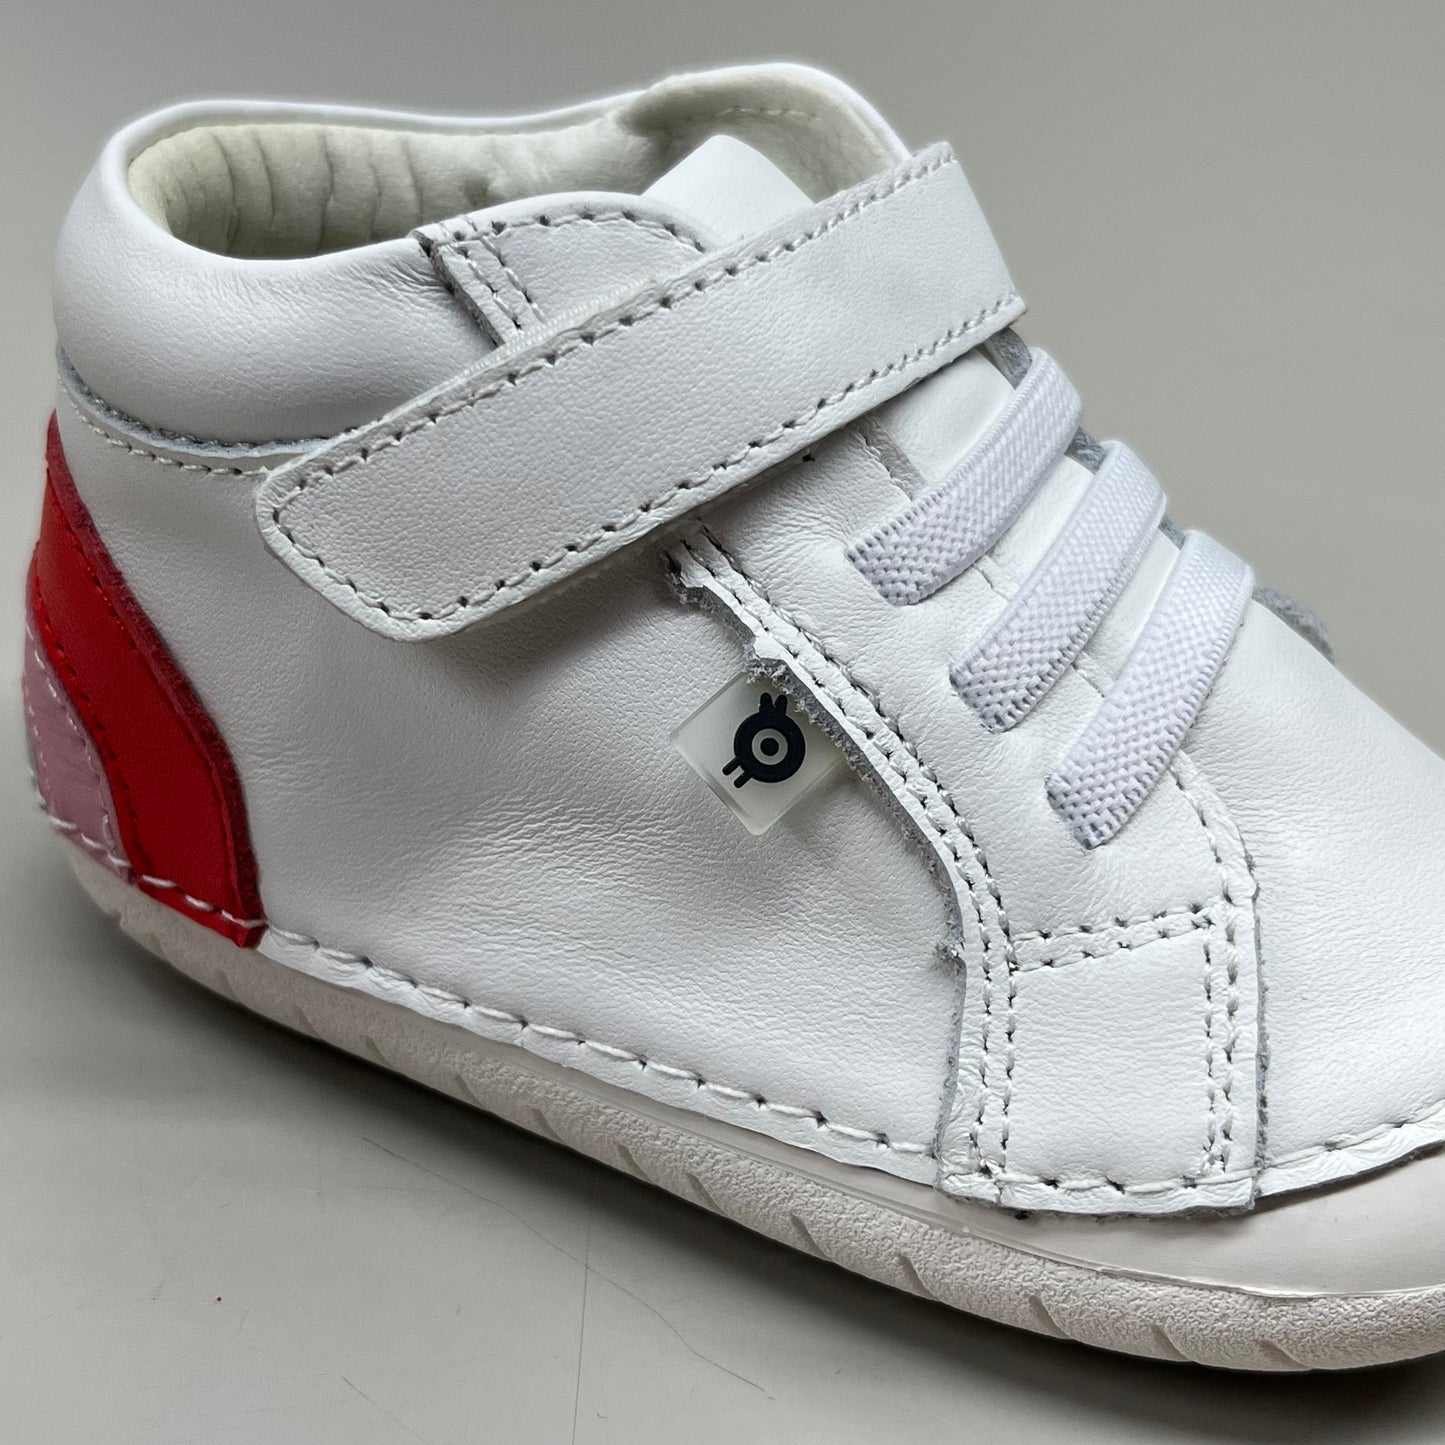 OLD SOLES Baby Champster Leather Shoe Sz 24 US 8 Snow/Red/ Pink/Silver #4091